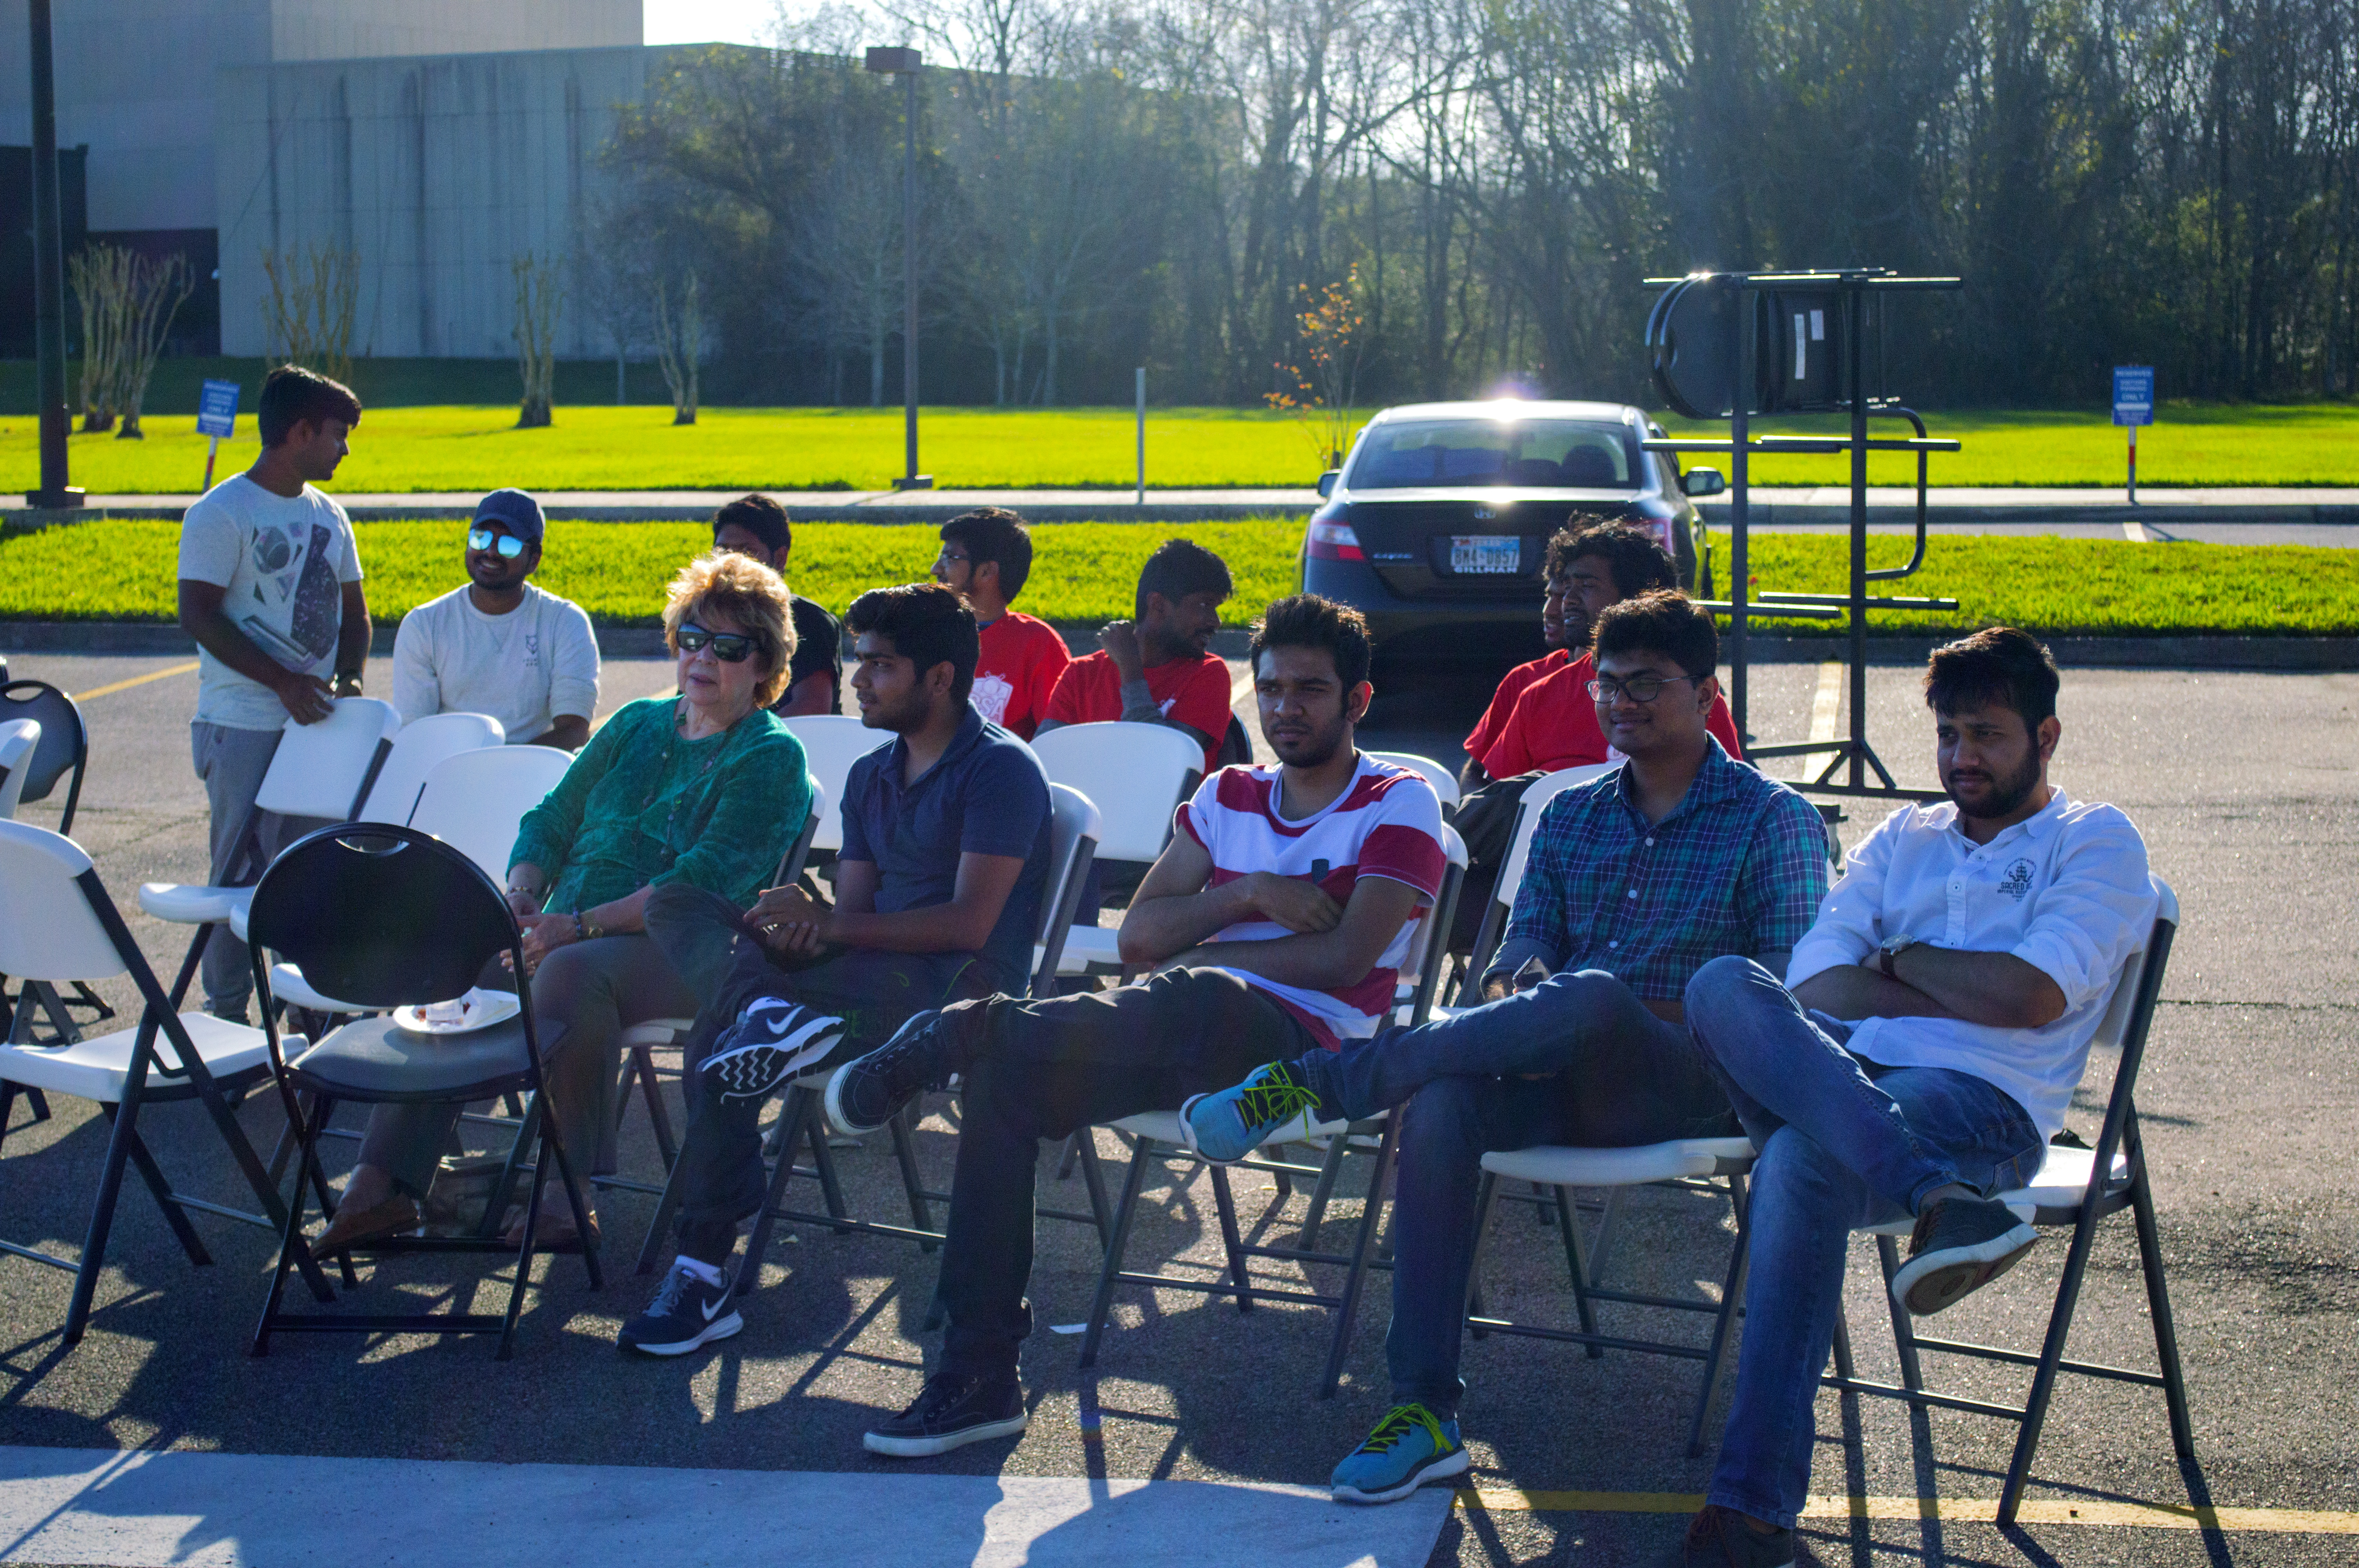 Photo: Spectators watching a cricket match at UHCL parking lot. Photo by The Signal reporter Jonathan Hua.